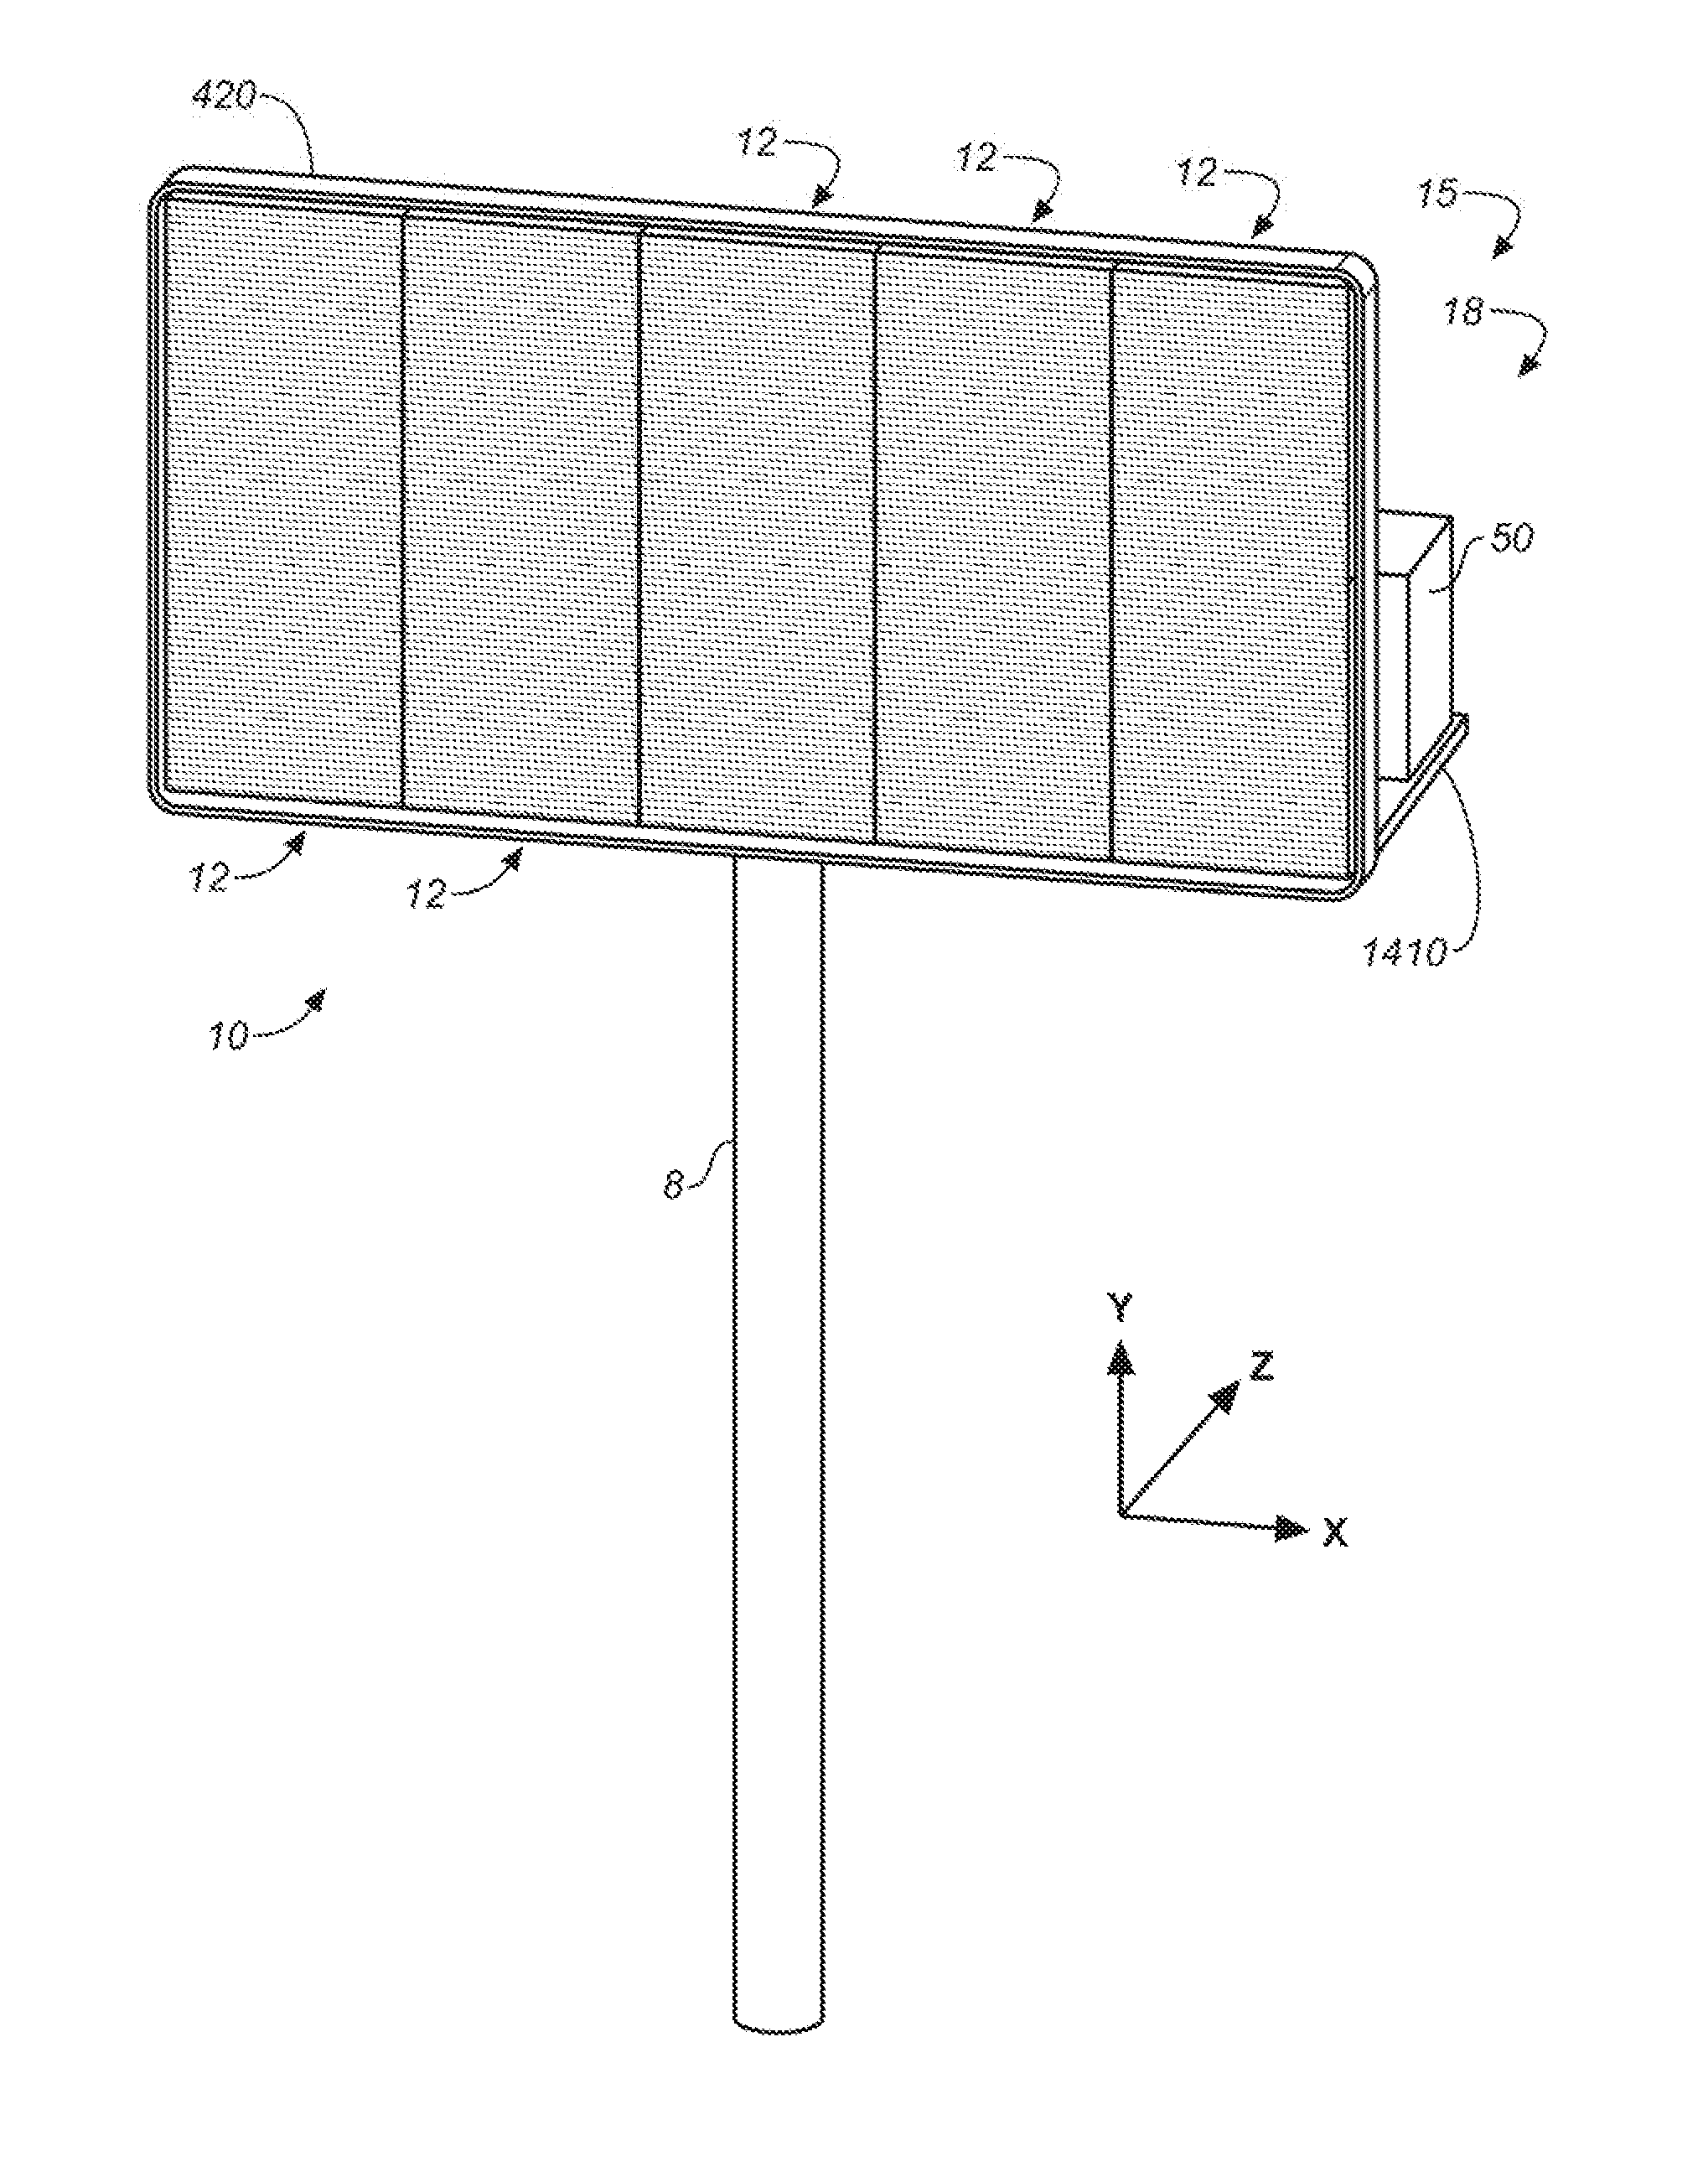 Customized sectional sign assembly kit and method of using kit for constructon and installation of same